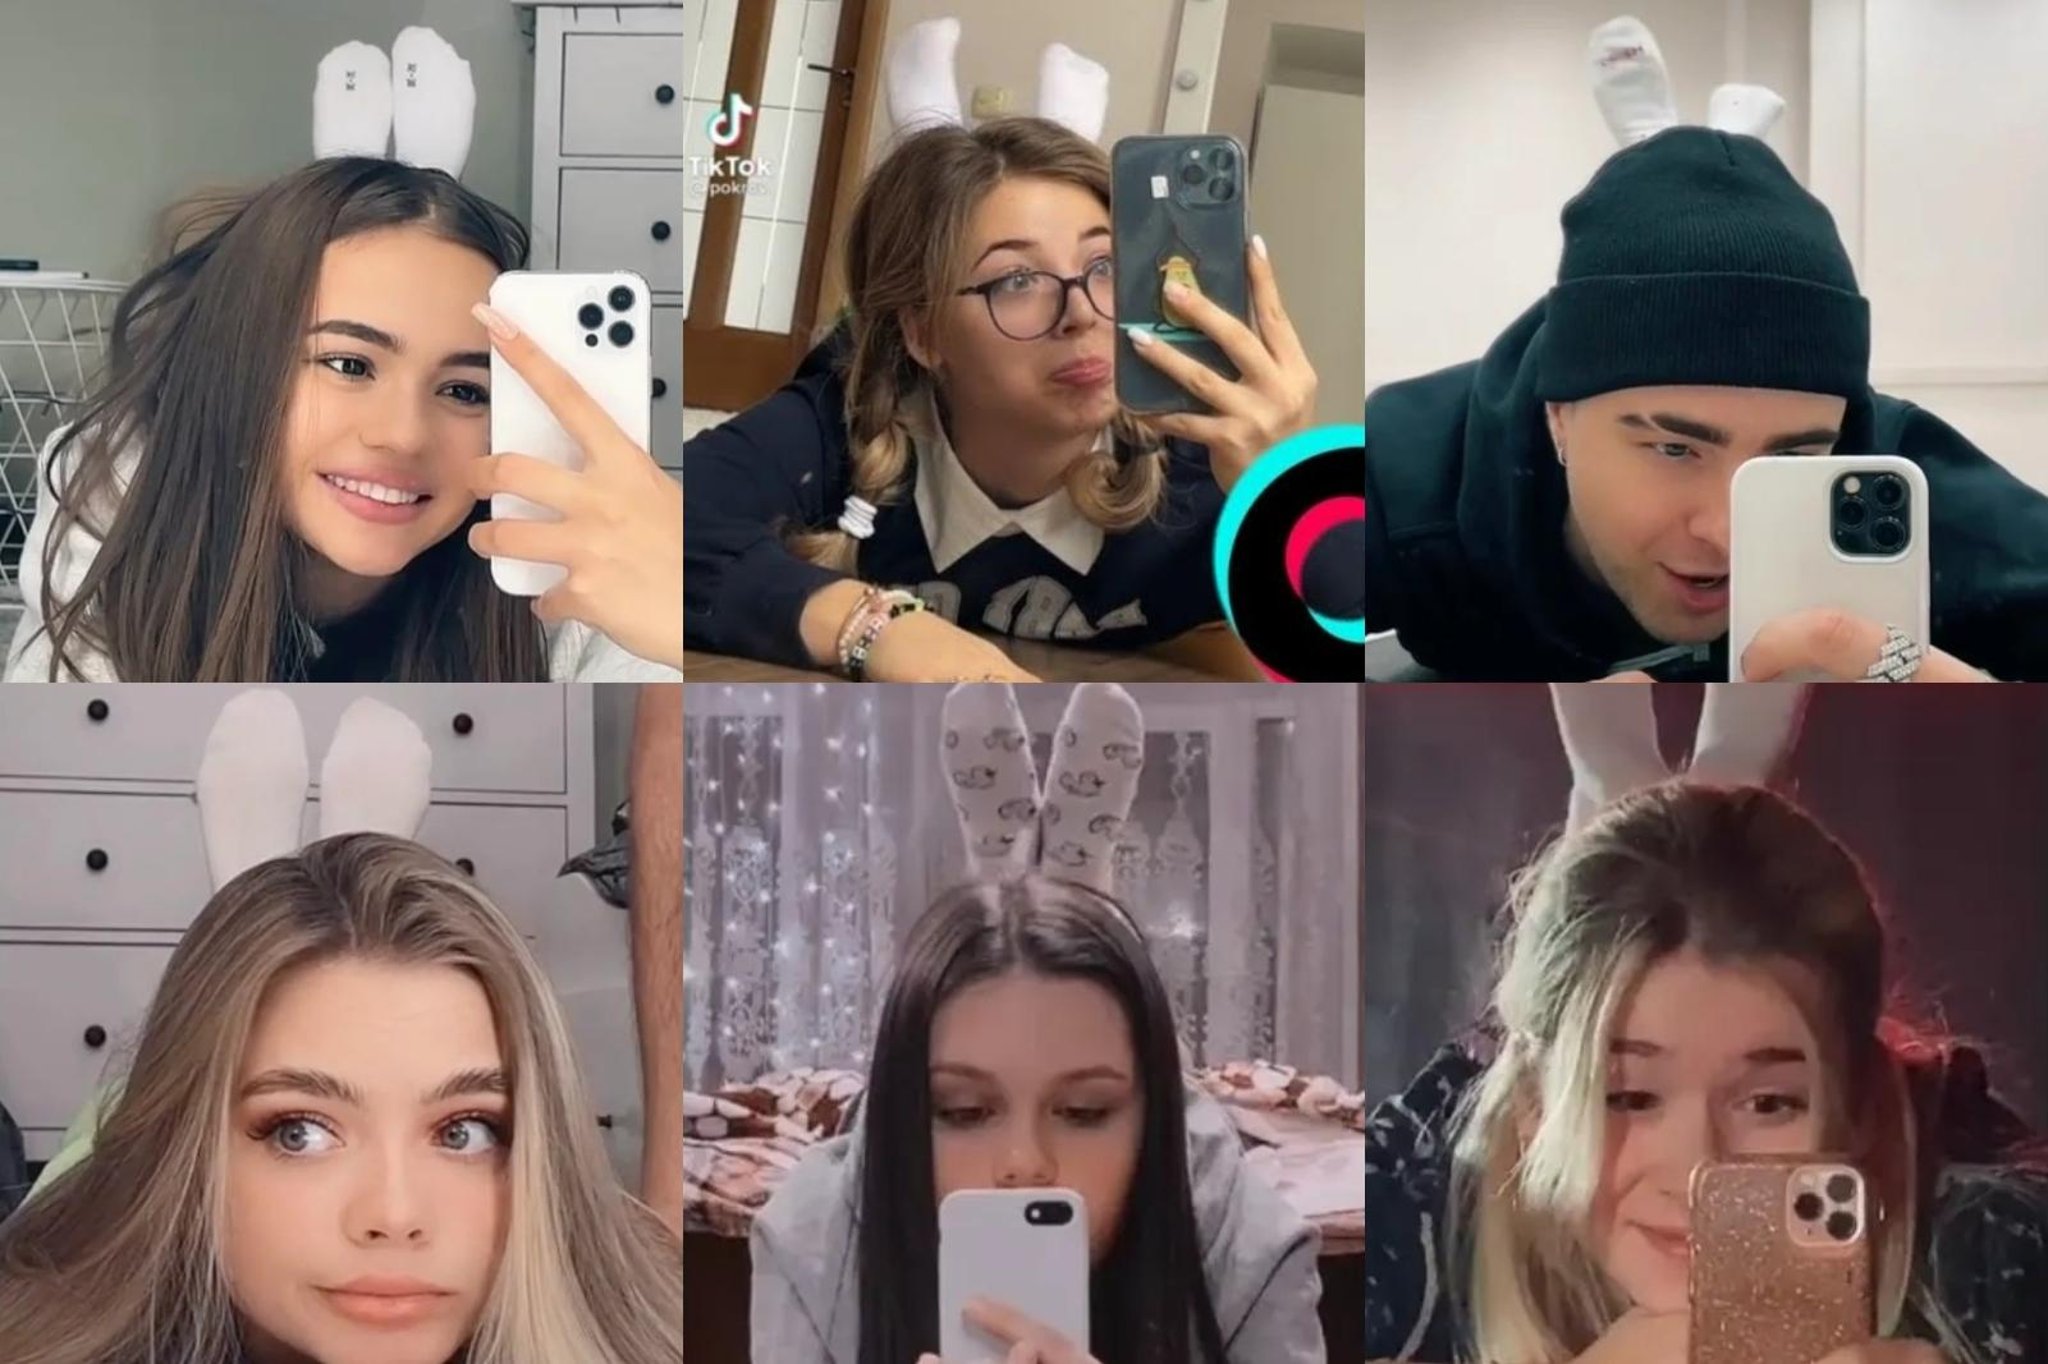 Bugs Bunny Challenge Risque New Tiktok Trend Explained What Is The Song Lyrics Origins And How To Do It Edinburgh News